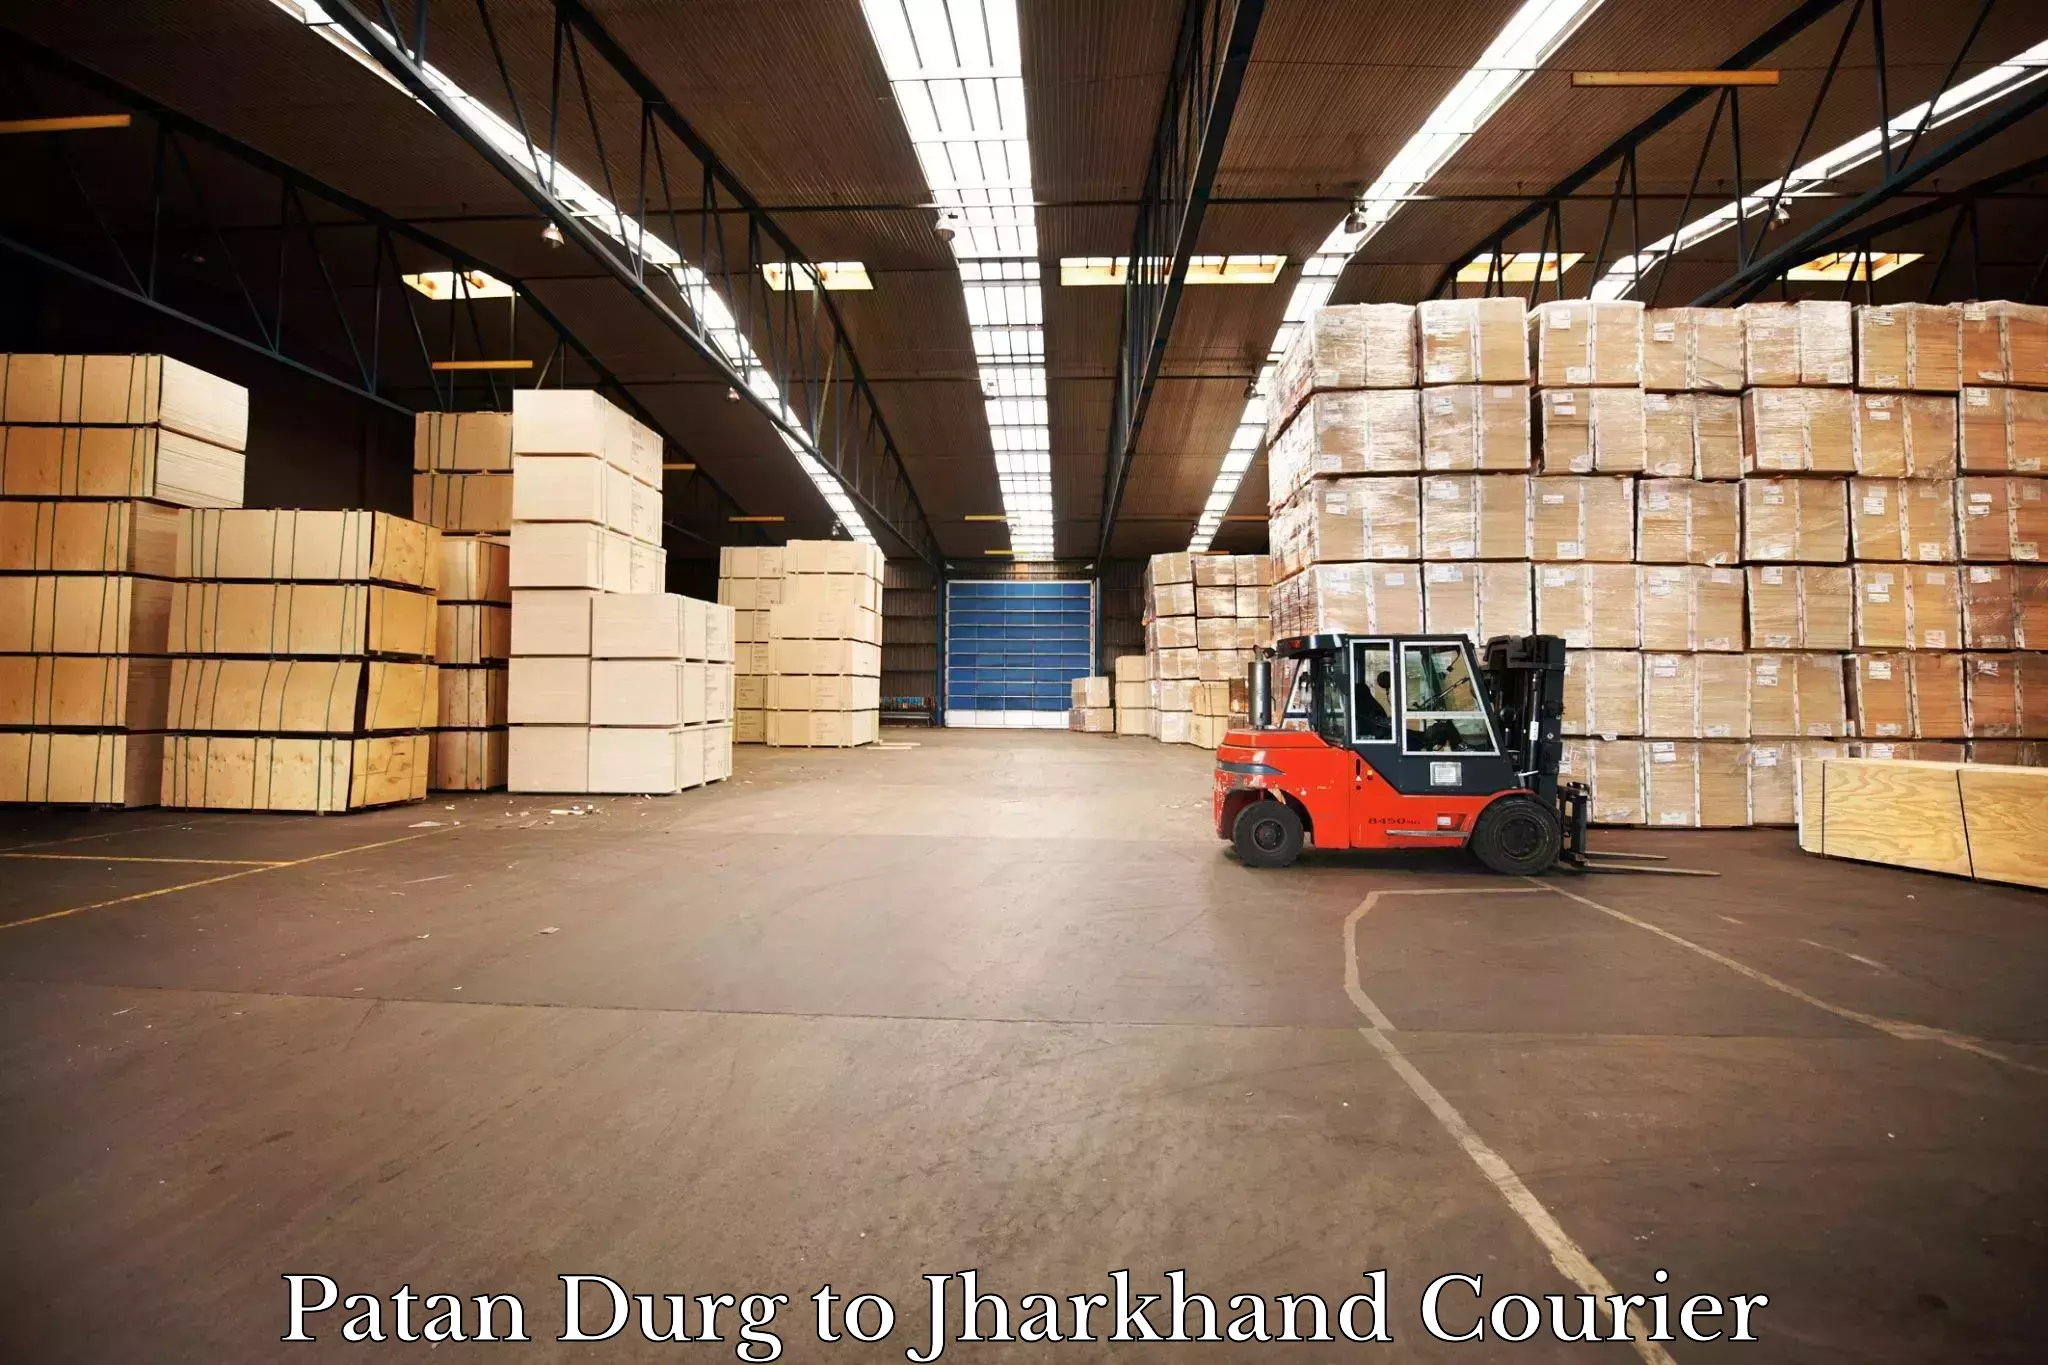 Courier service partnerships Patan Durg to Jharkhand